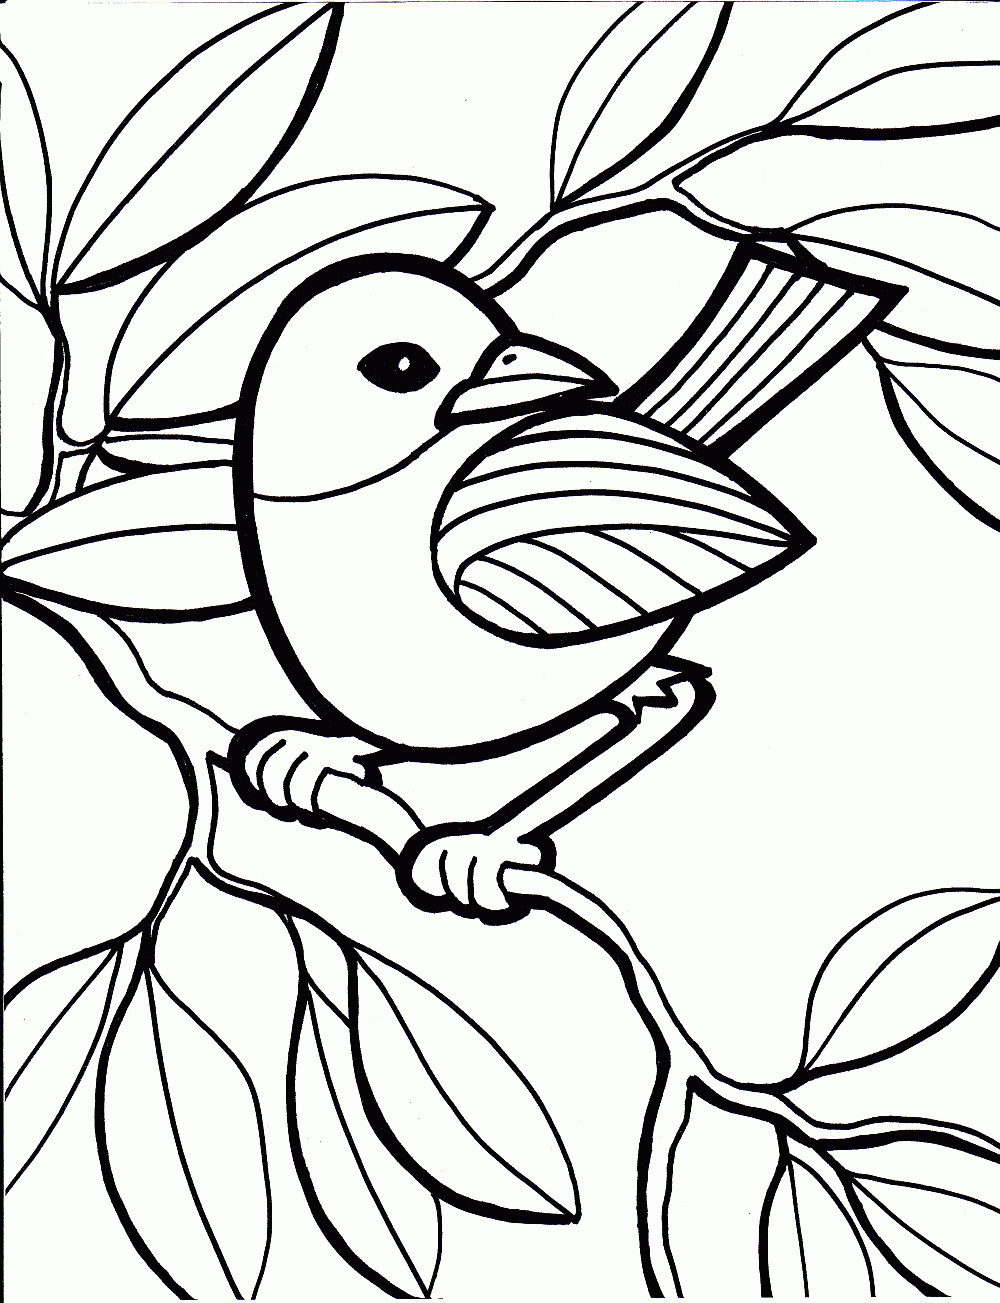 Coloring Pages For Elderly Adults at GetColorings.com | Free printable